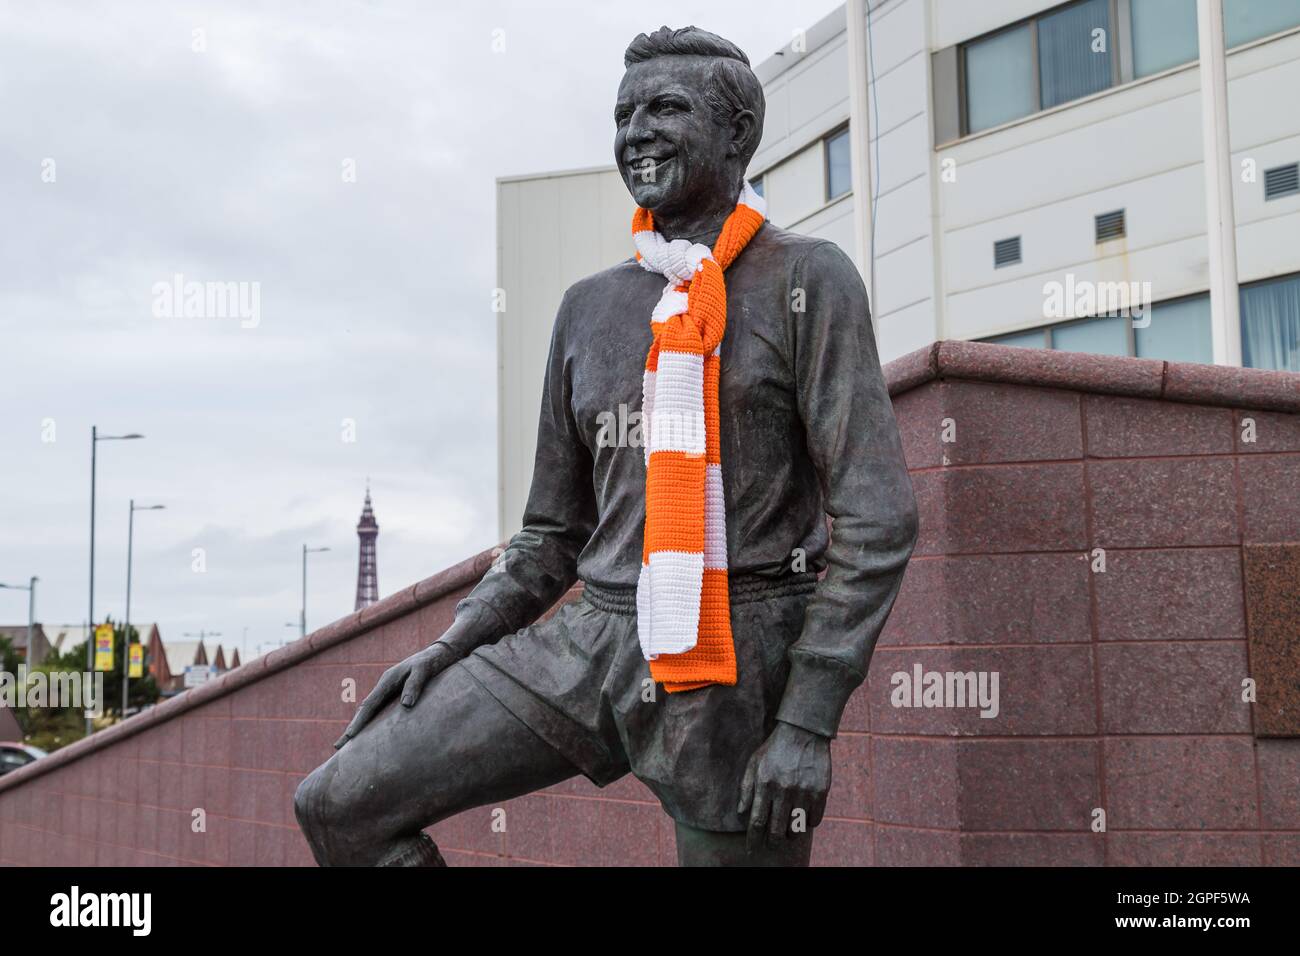 A statue of former Blackpool FC player and manager Jimmy Armfield seen outside Bloomfield Road stadium in September 2021 with the Blackpool Tower in t Stock Photo